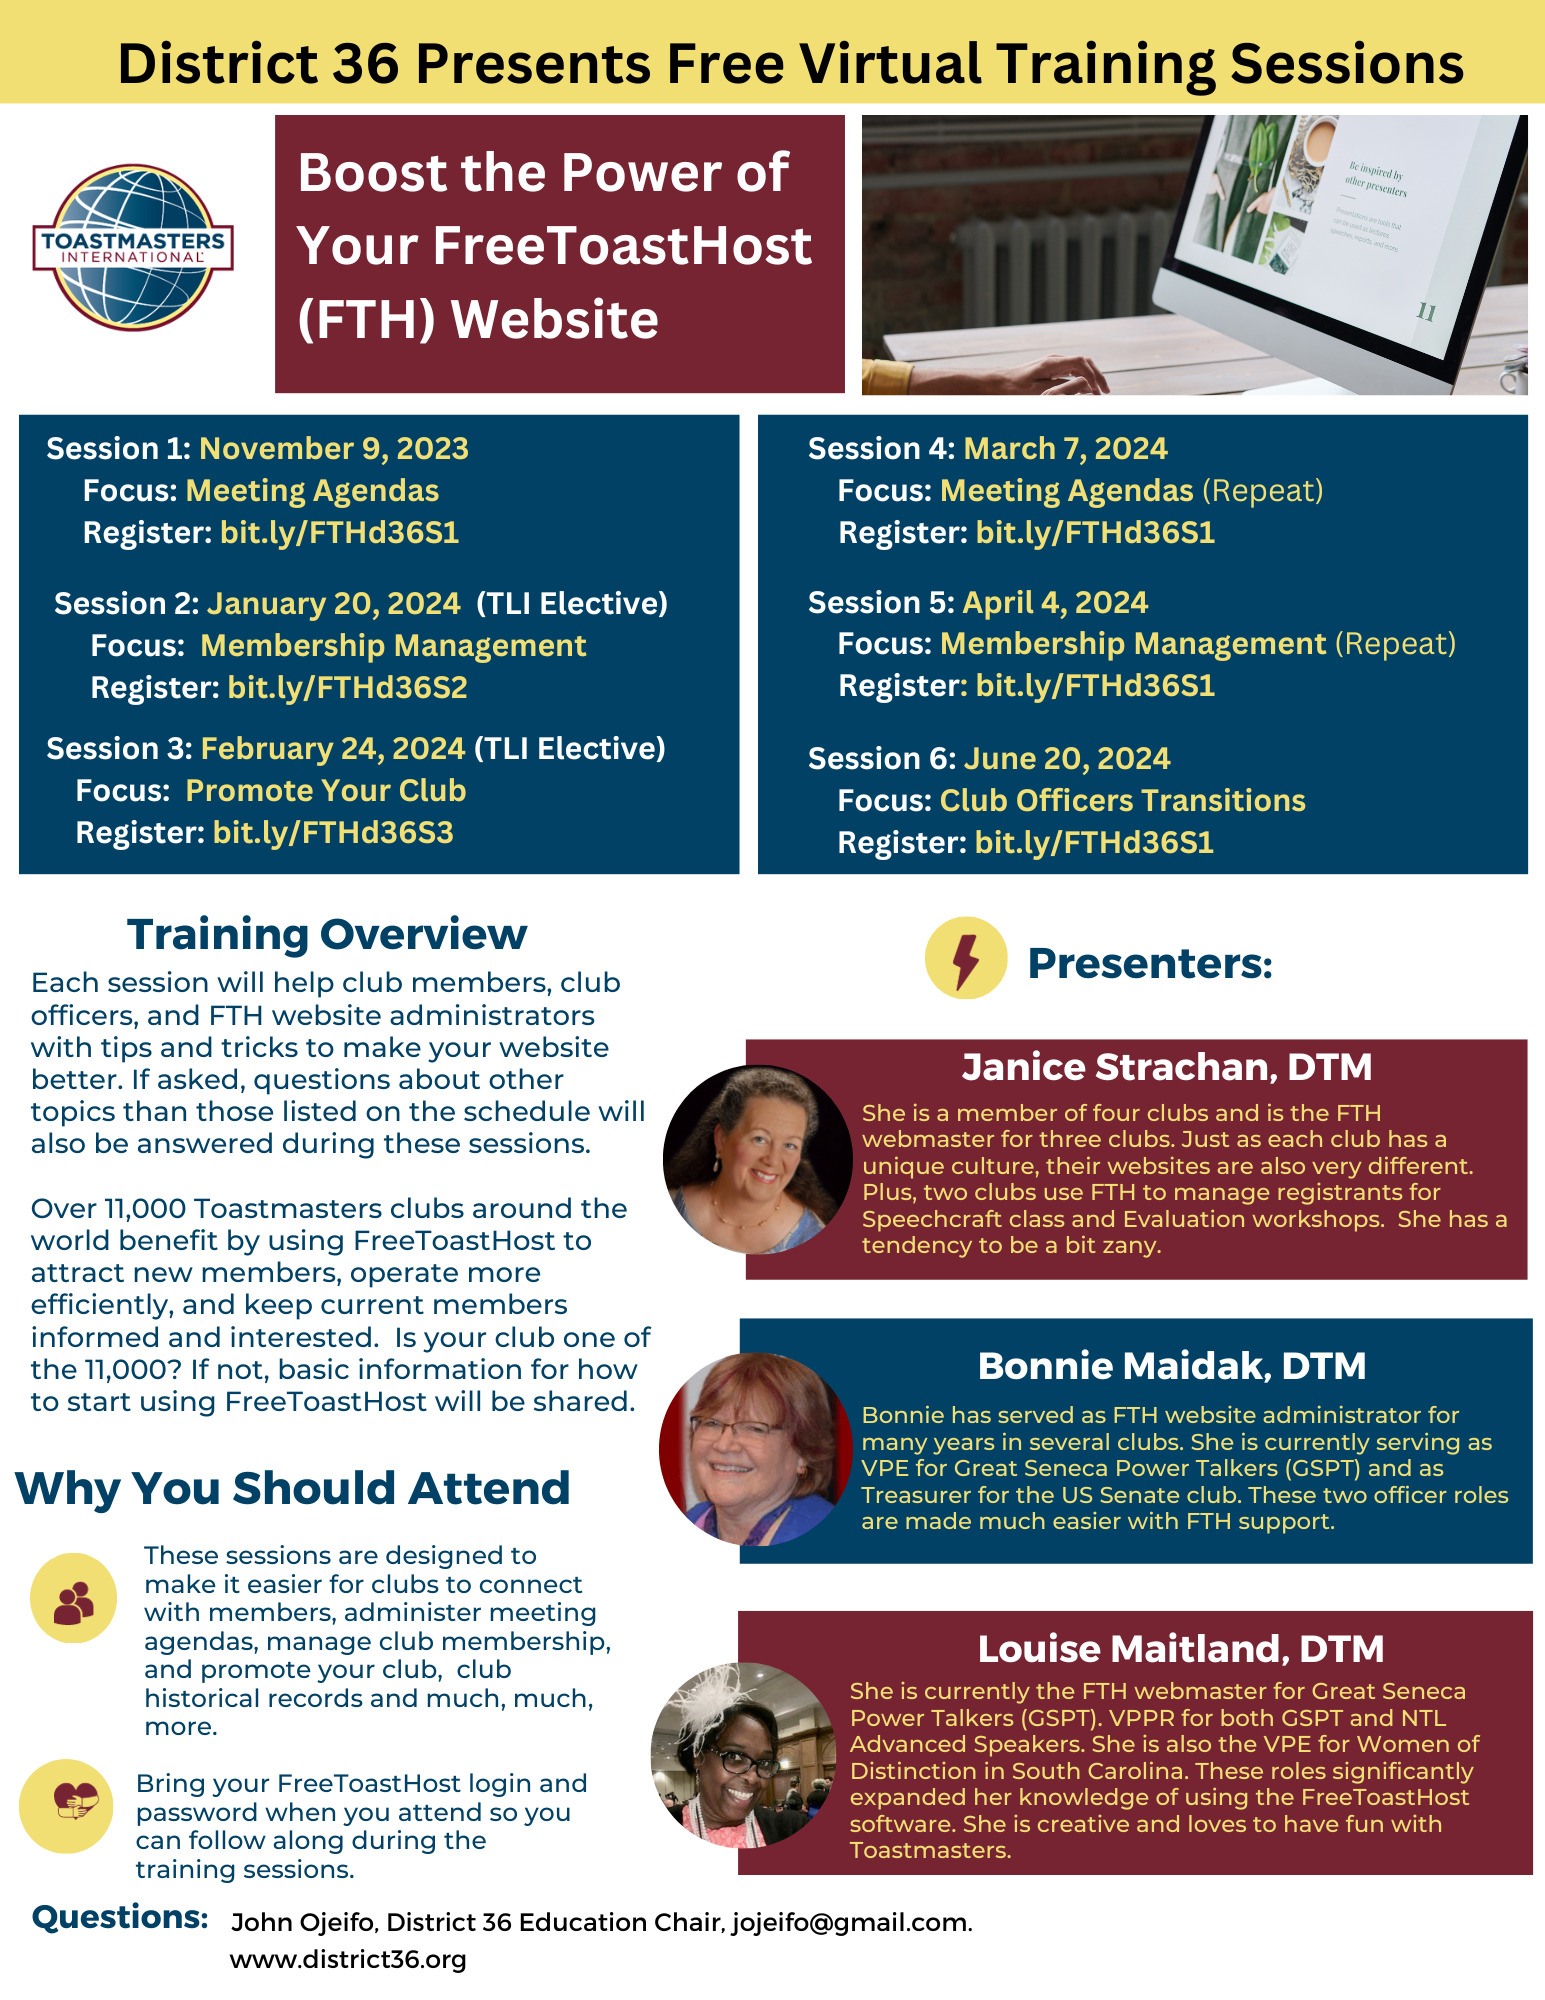 Boost the Power of Your FTH Website